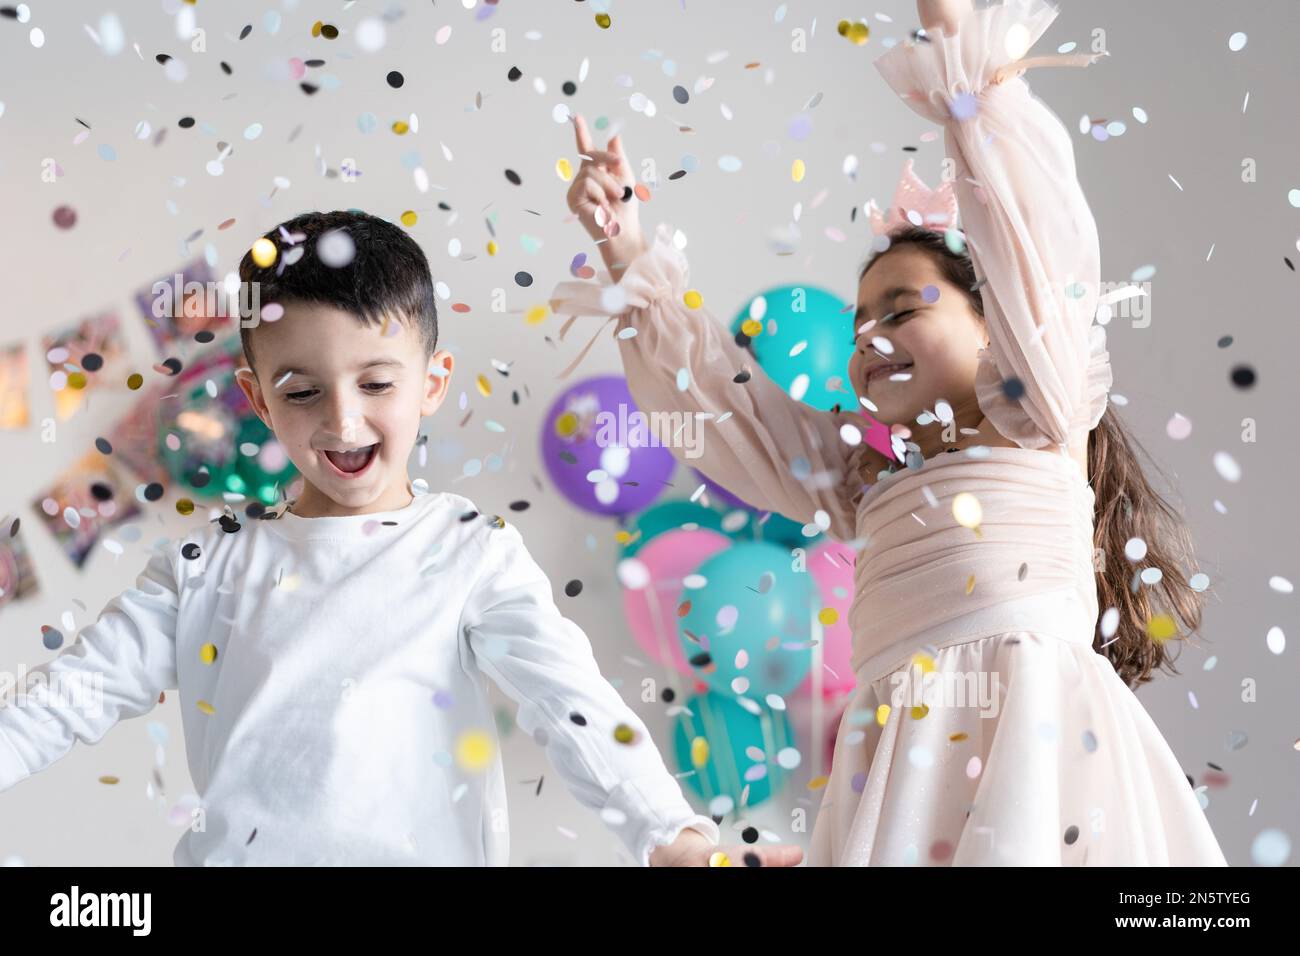 Smiling children with outstretched hands near falling confetti on party background. Stock Photo